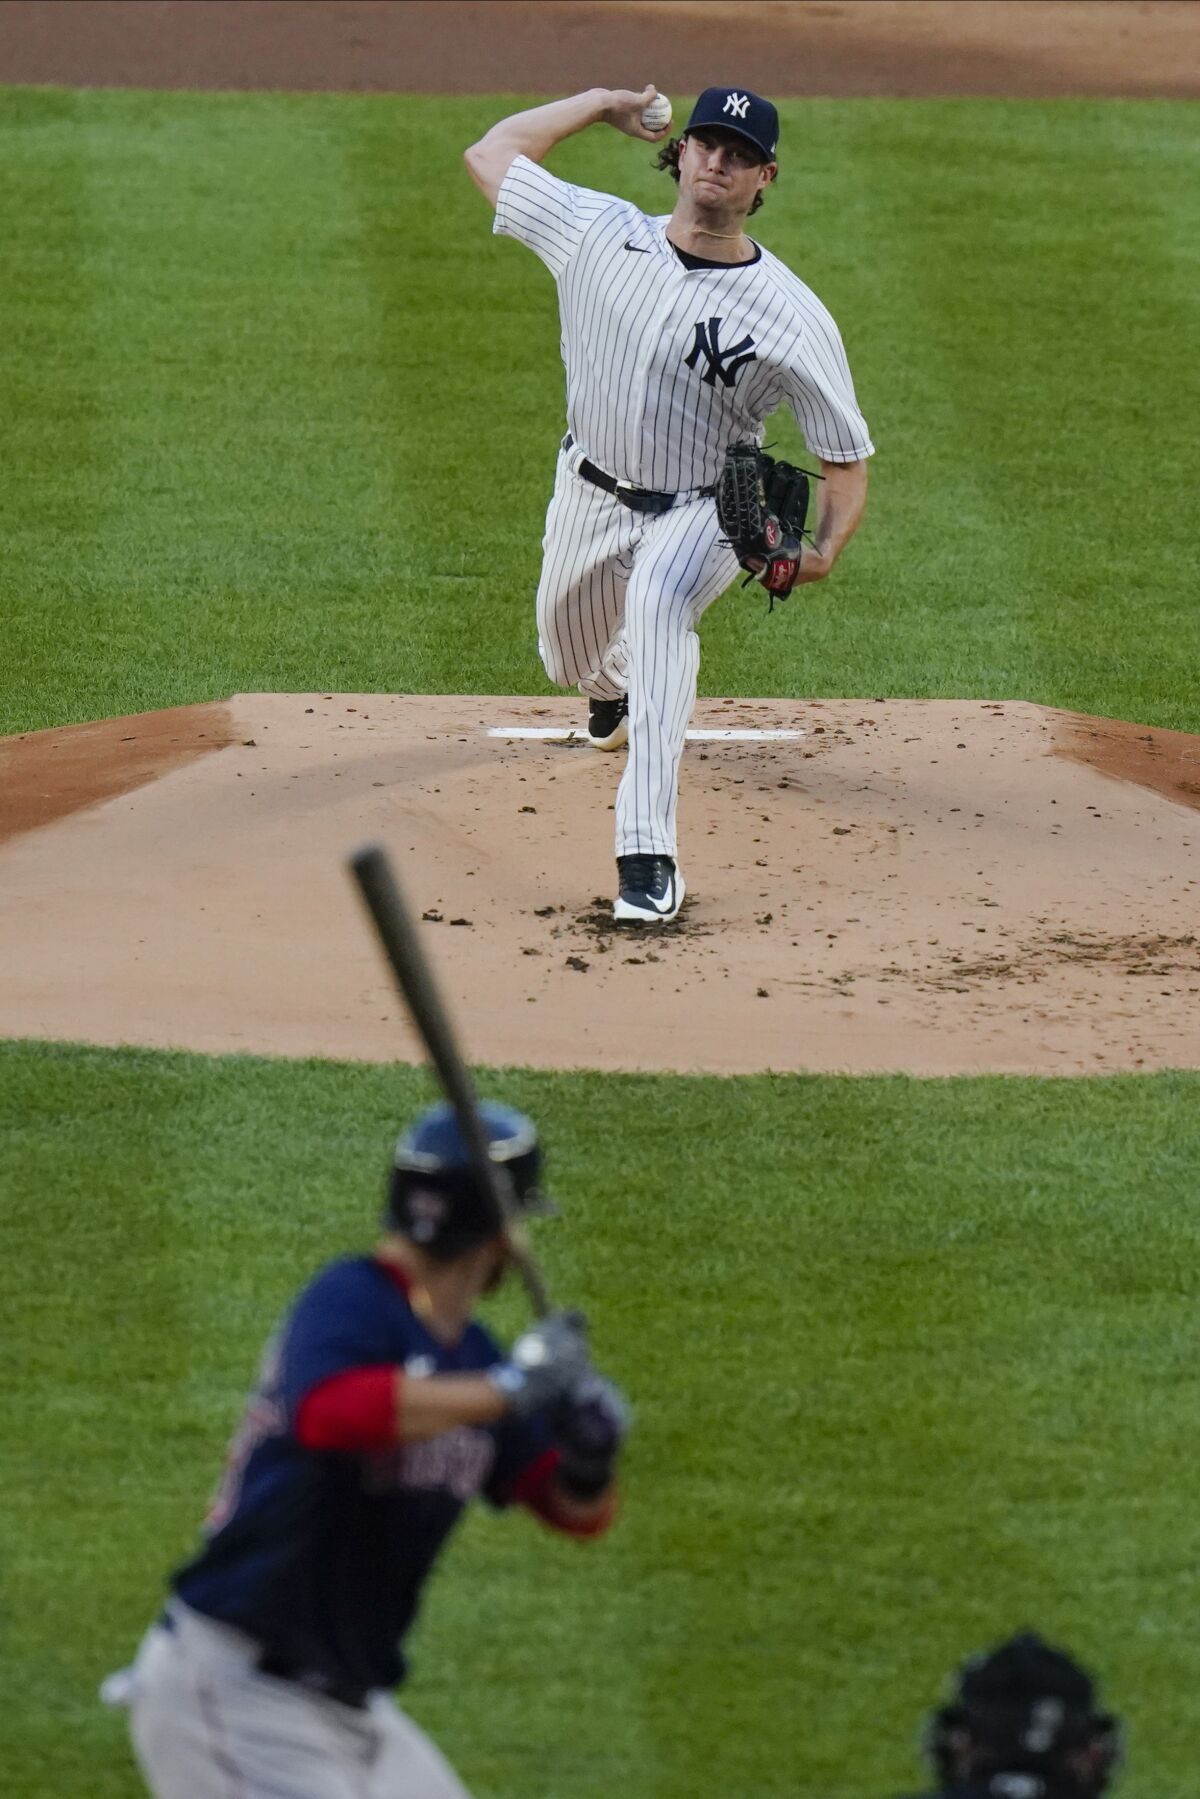 New York Yankees' Gerrit Cole delivers a pitch during the first inning of a baseball game against the Boston Red Sox Friday, Aug. 14, 2020, in New York. (AP Photo/Frank Franklin II)